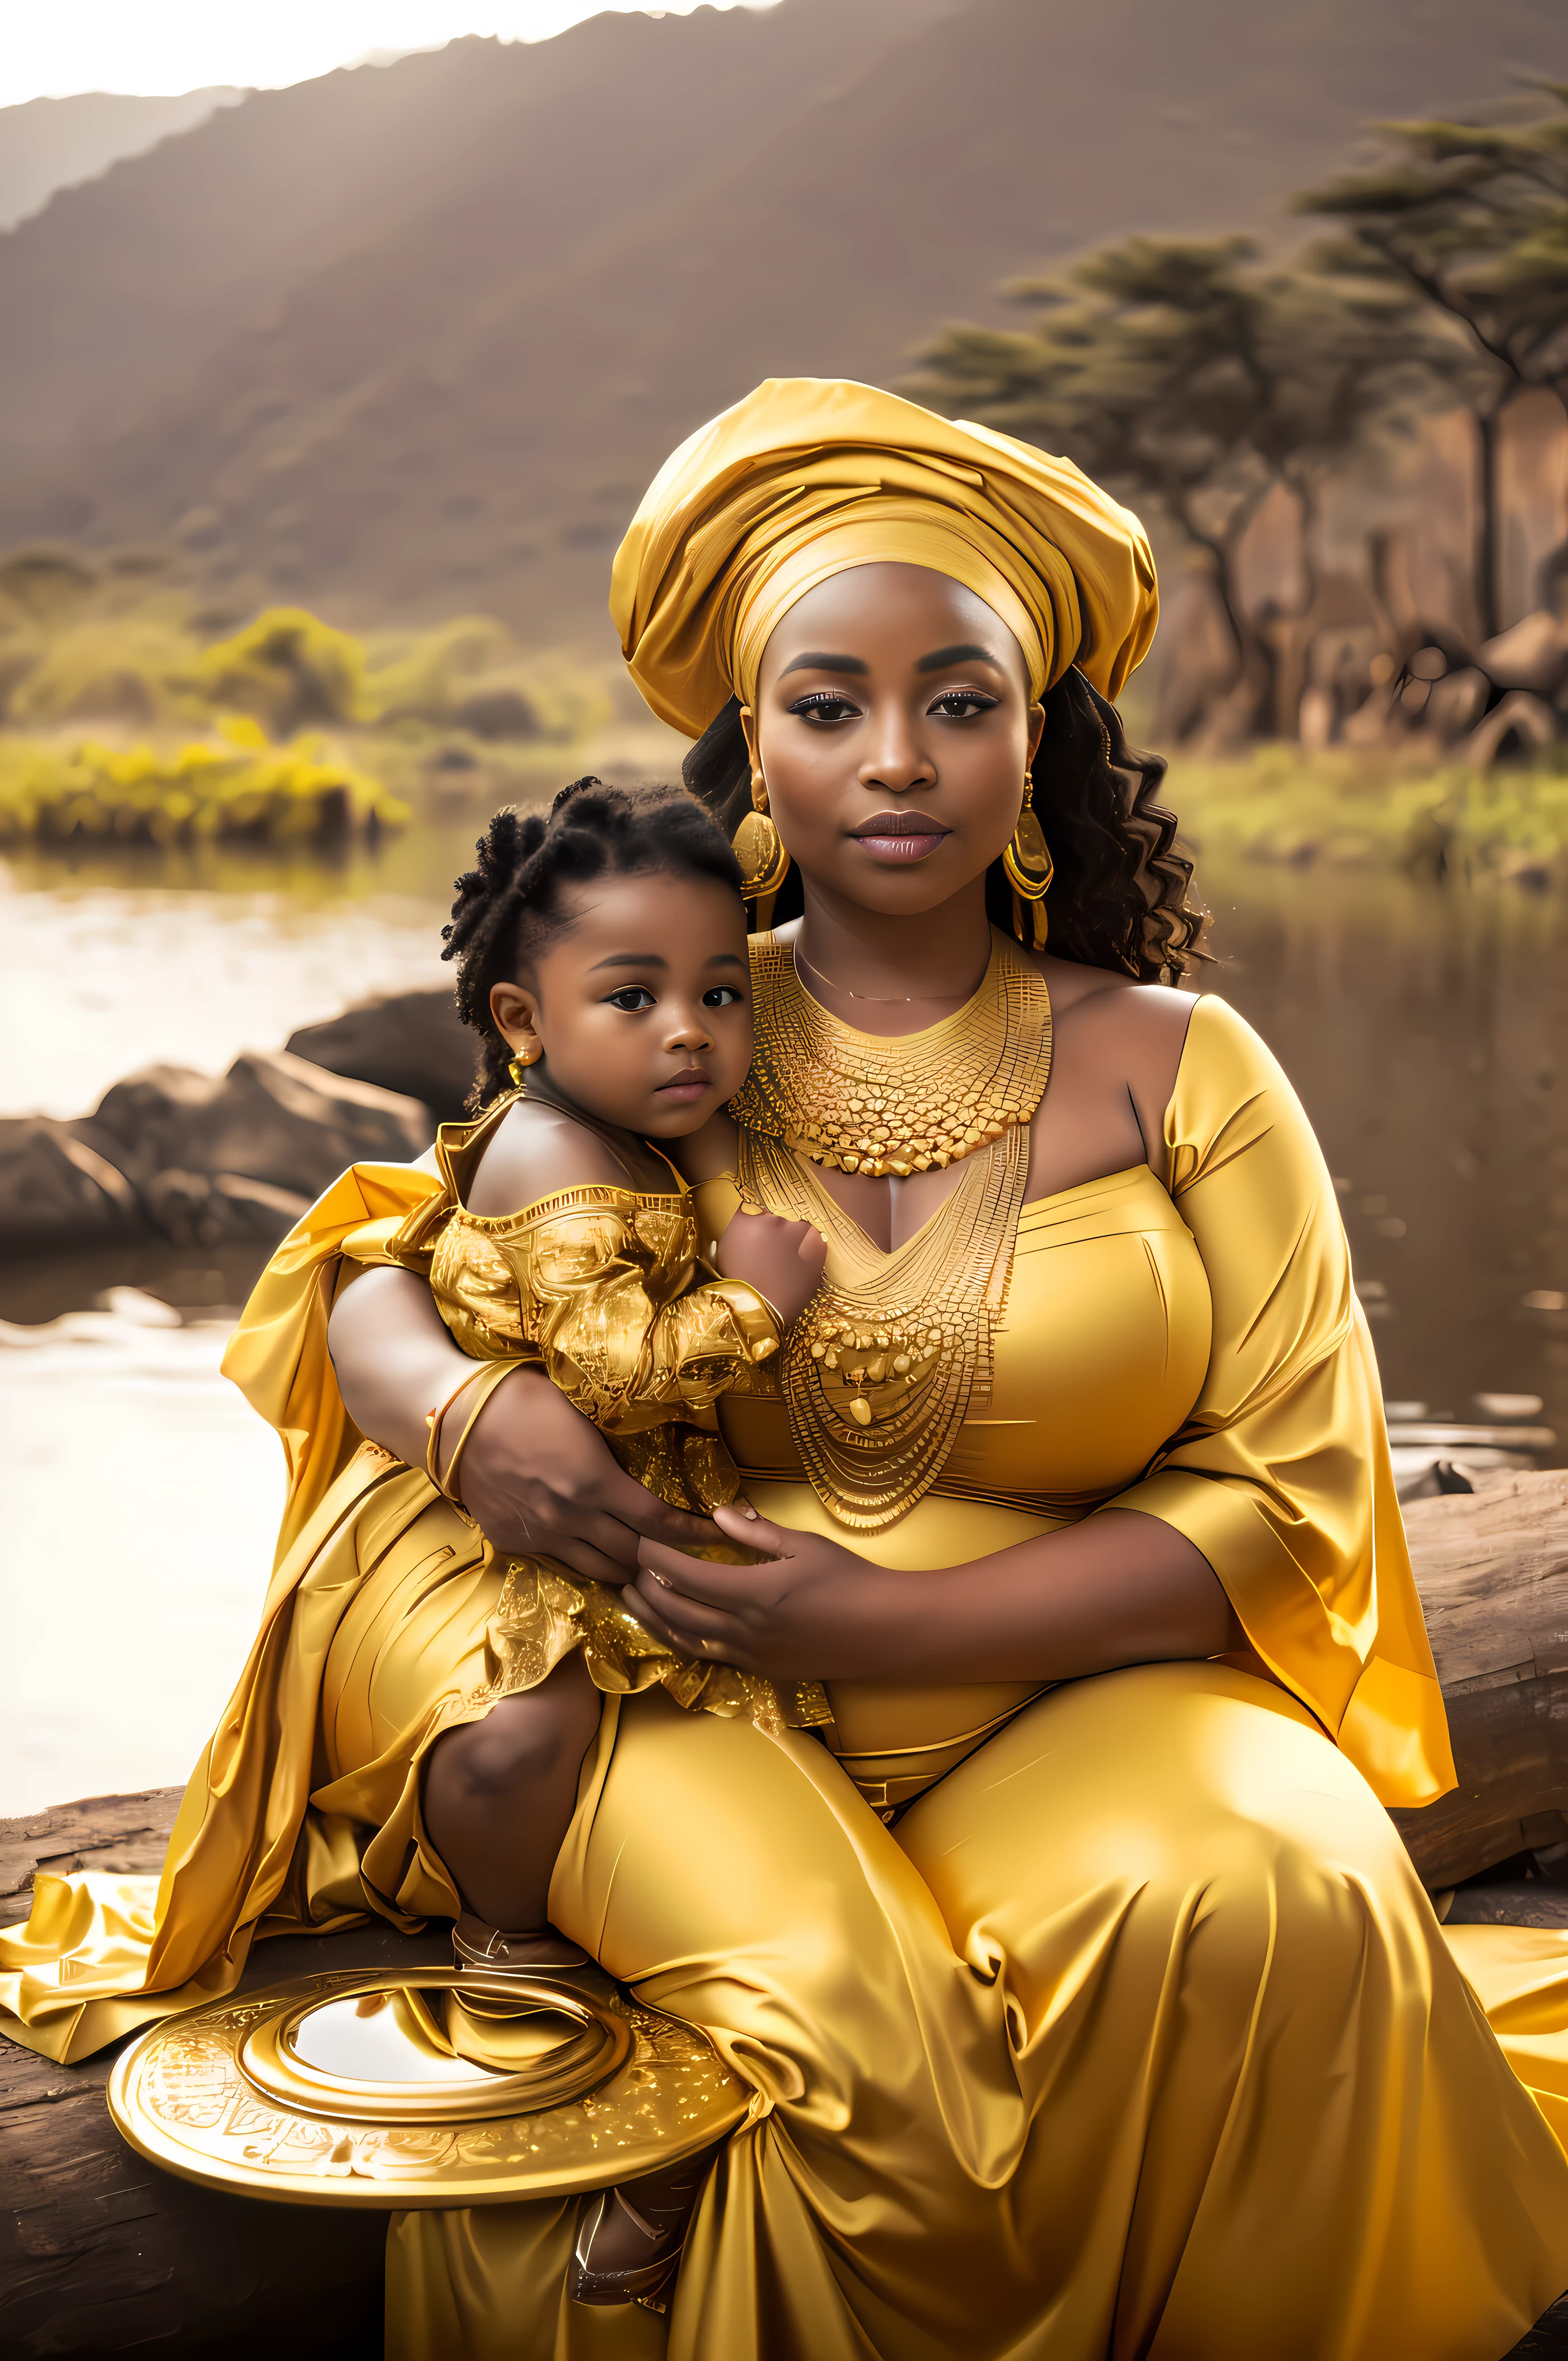 a pregnant woman in a gold dress holding a baby, Princesa africanaa deslumbrante, Princesa negra africanaa, Rainha africanaa, african princess, golden hues, photo of a beautiful, shades of gold display naturally, mulher africanaa, maternal photography 4 k, gorgeous  woman, traditional beauty, africana, draped in silky gold, Joias africanaas intrincadas, golden colors, golden aura, coberto de ouro